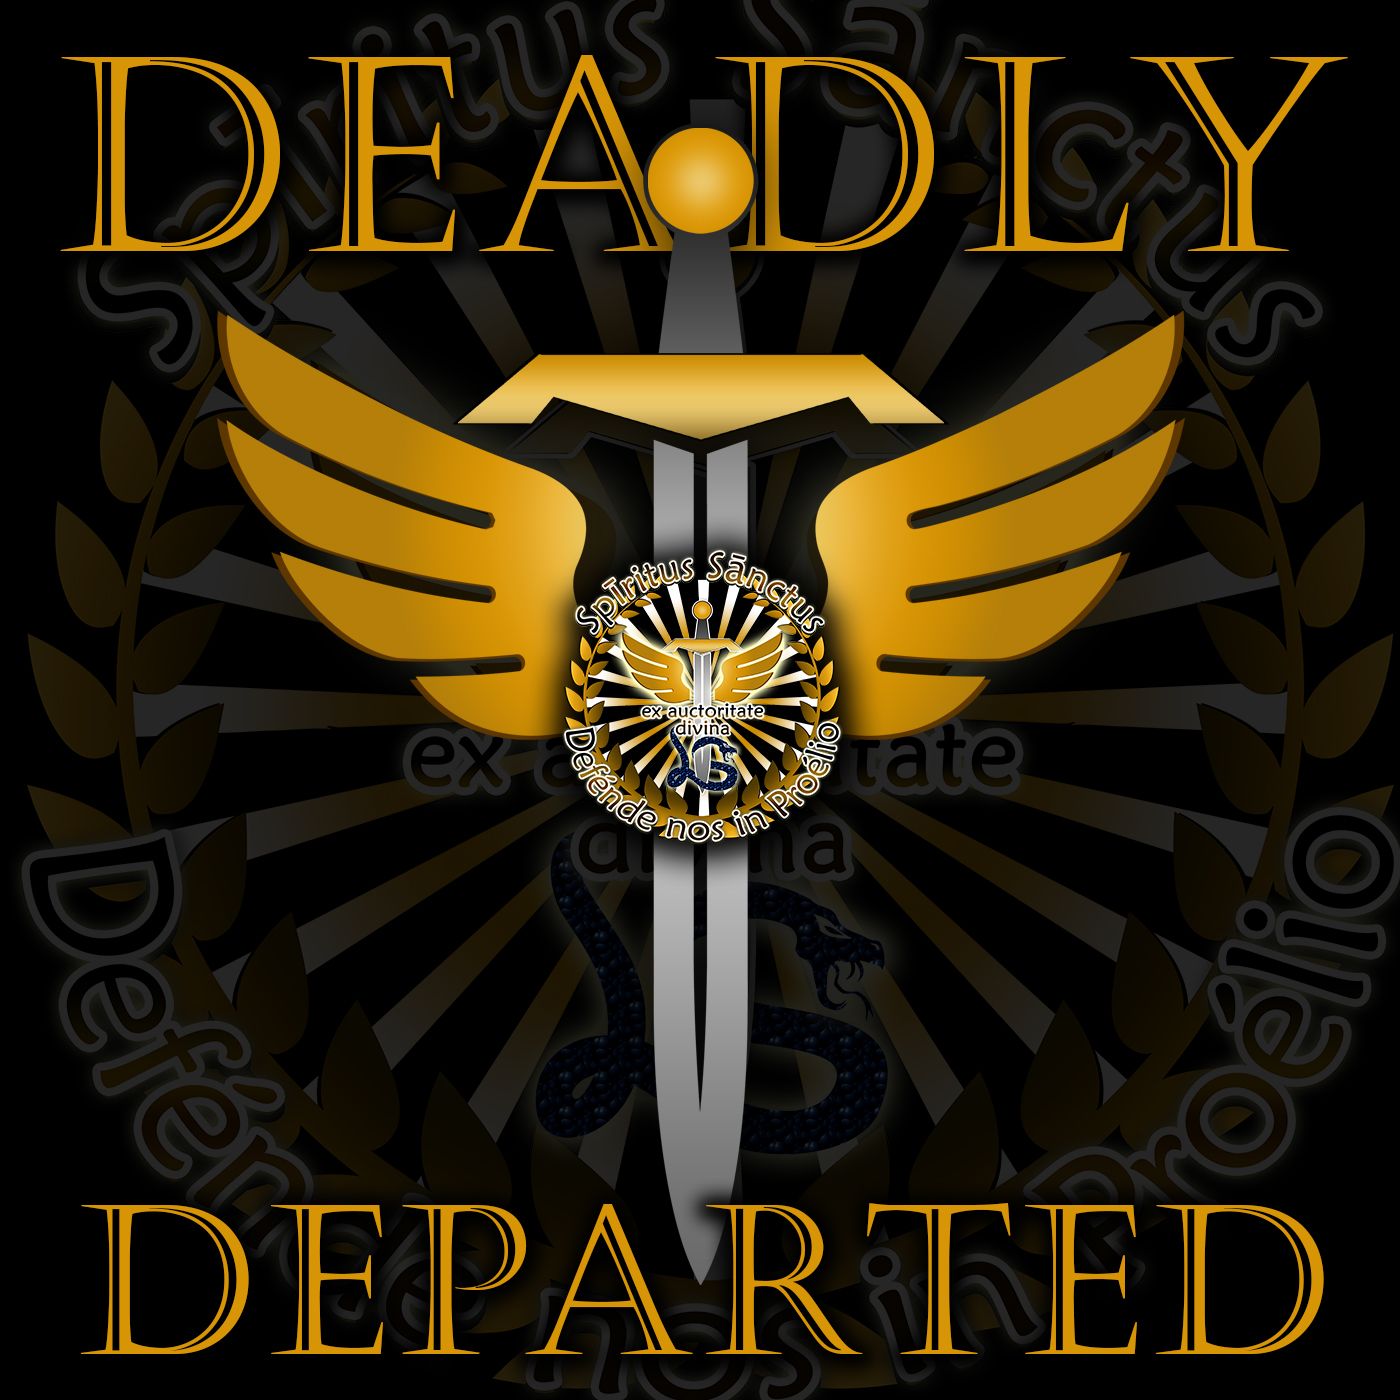 Deadly Departed